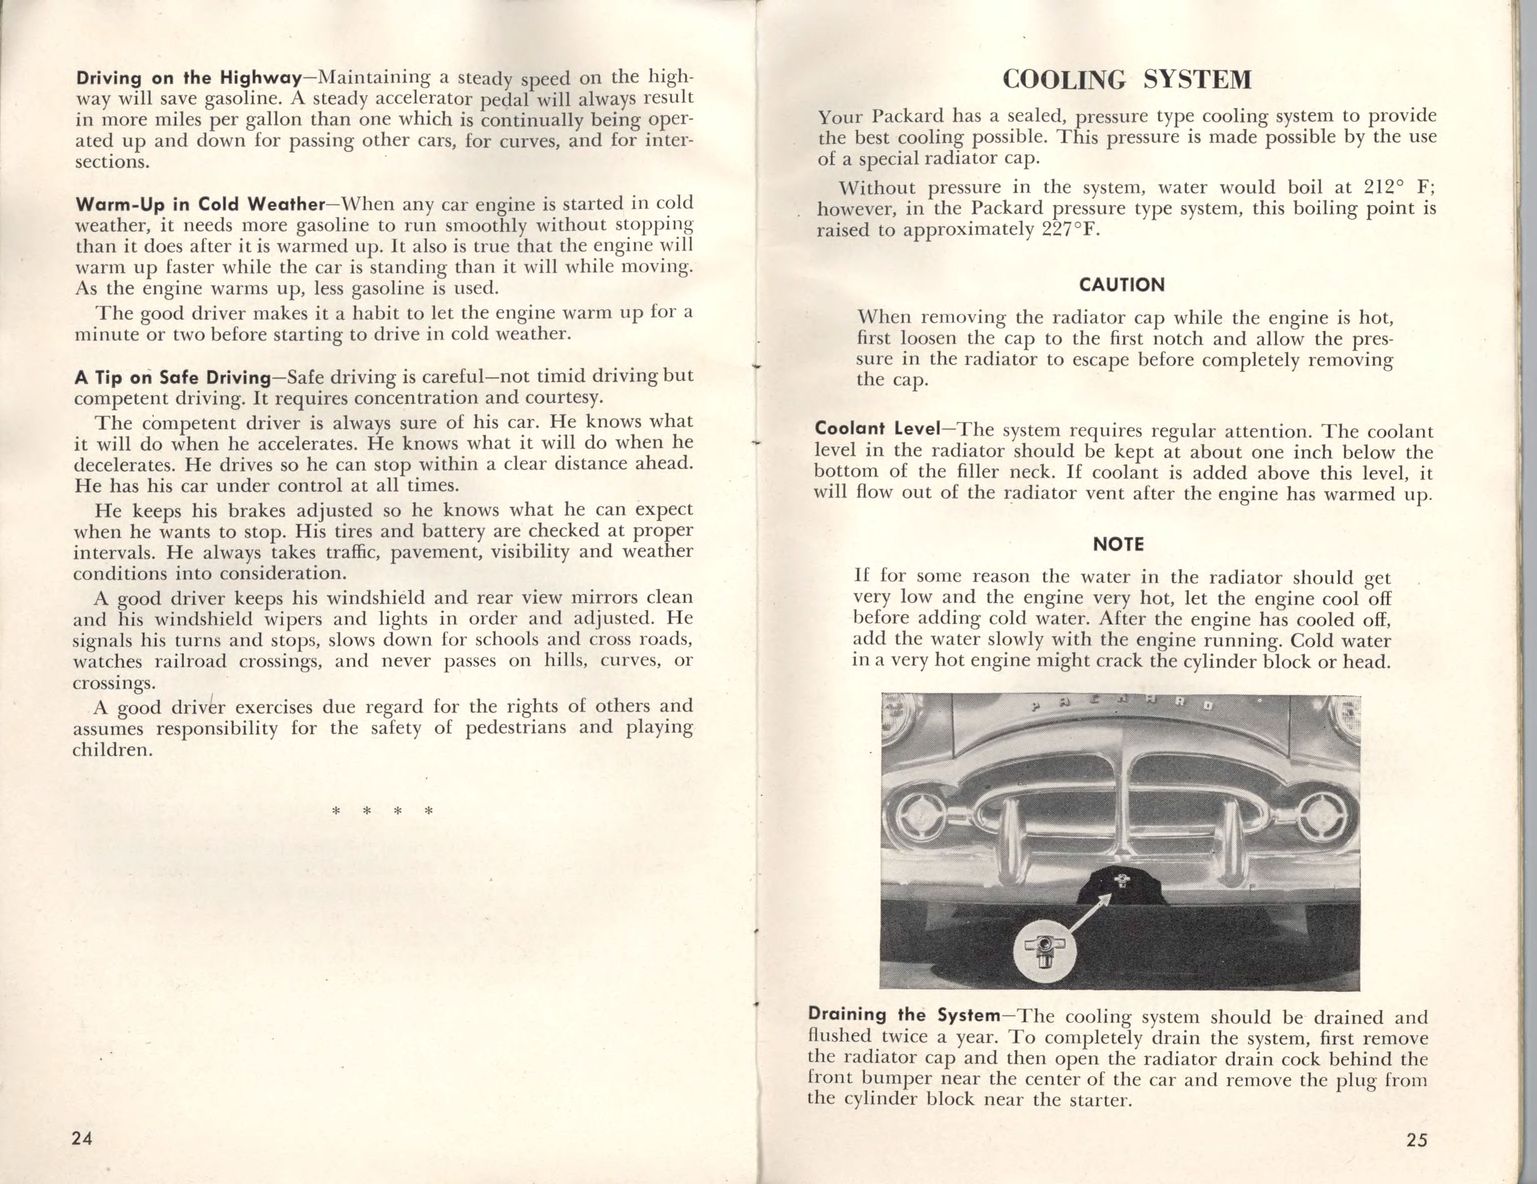 1951 Packard Owners Manual Page 18